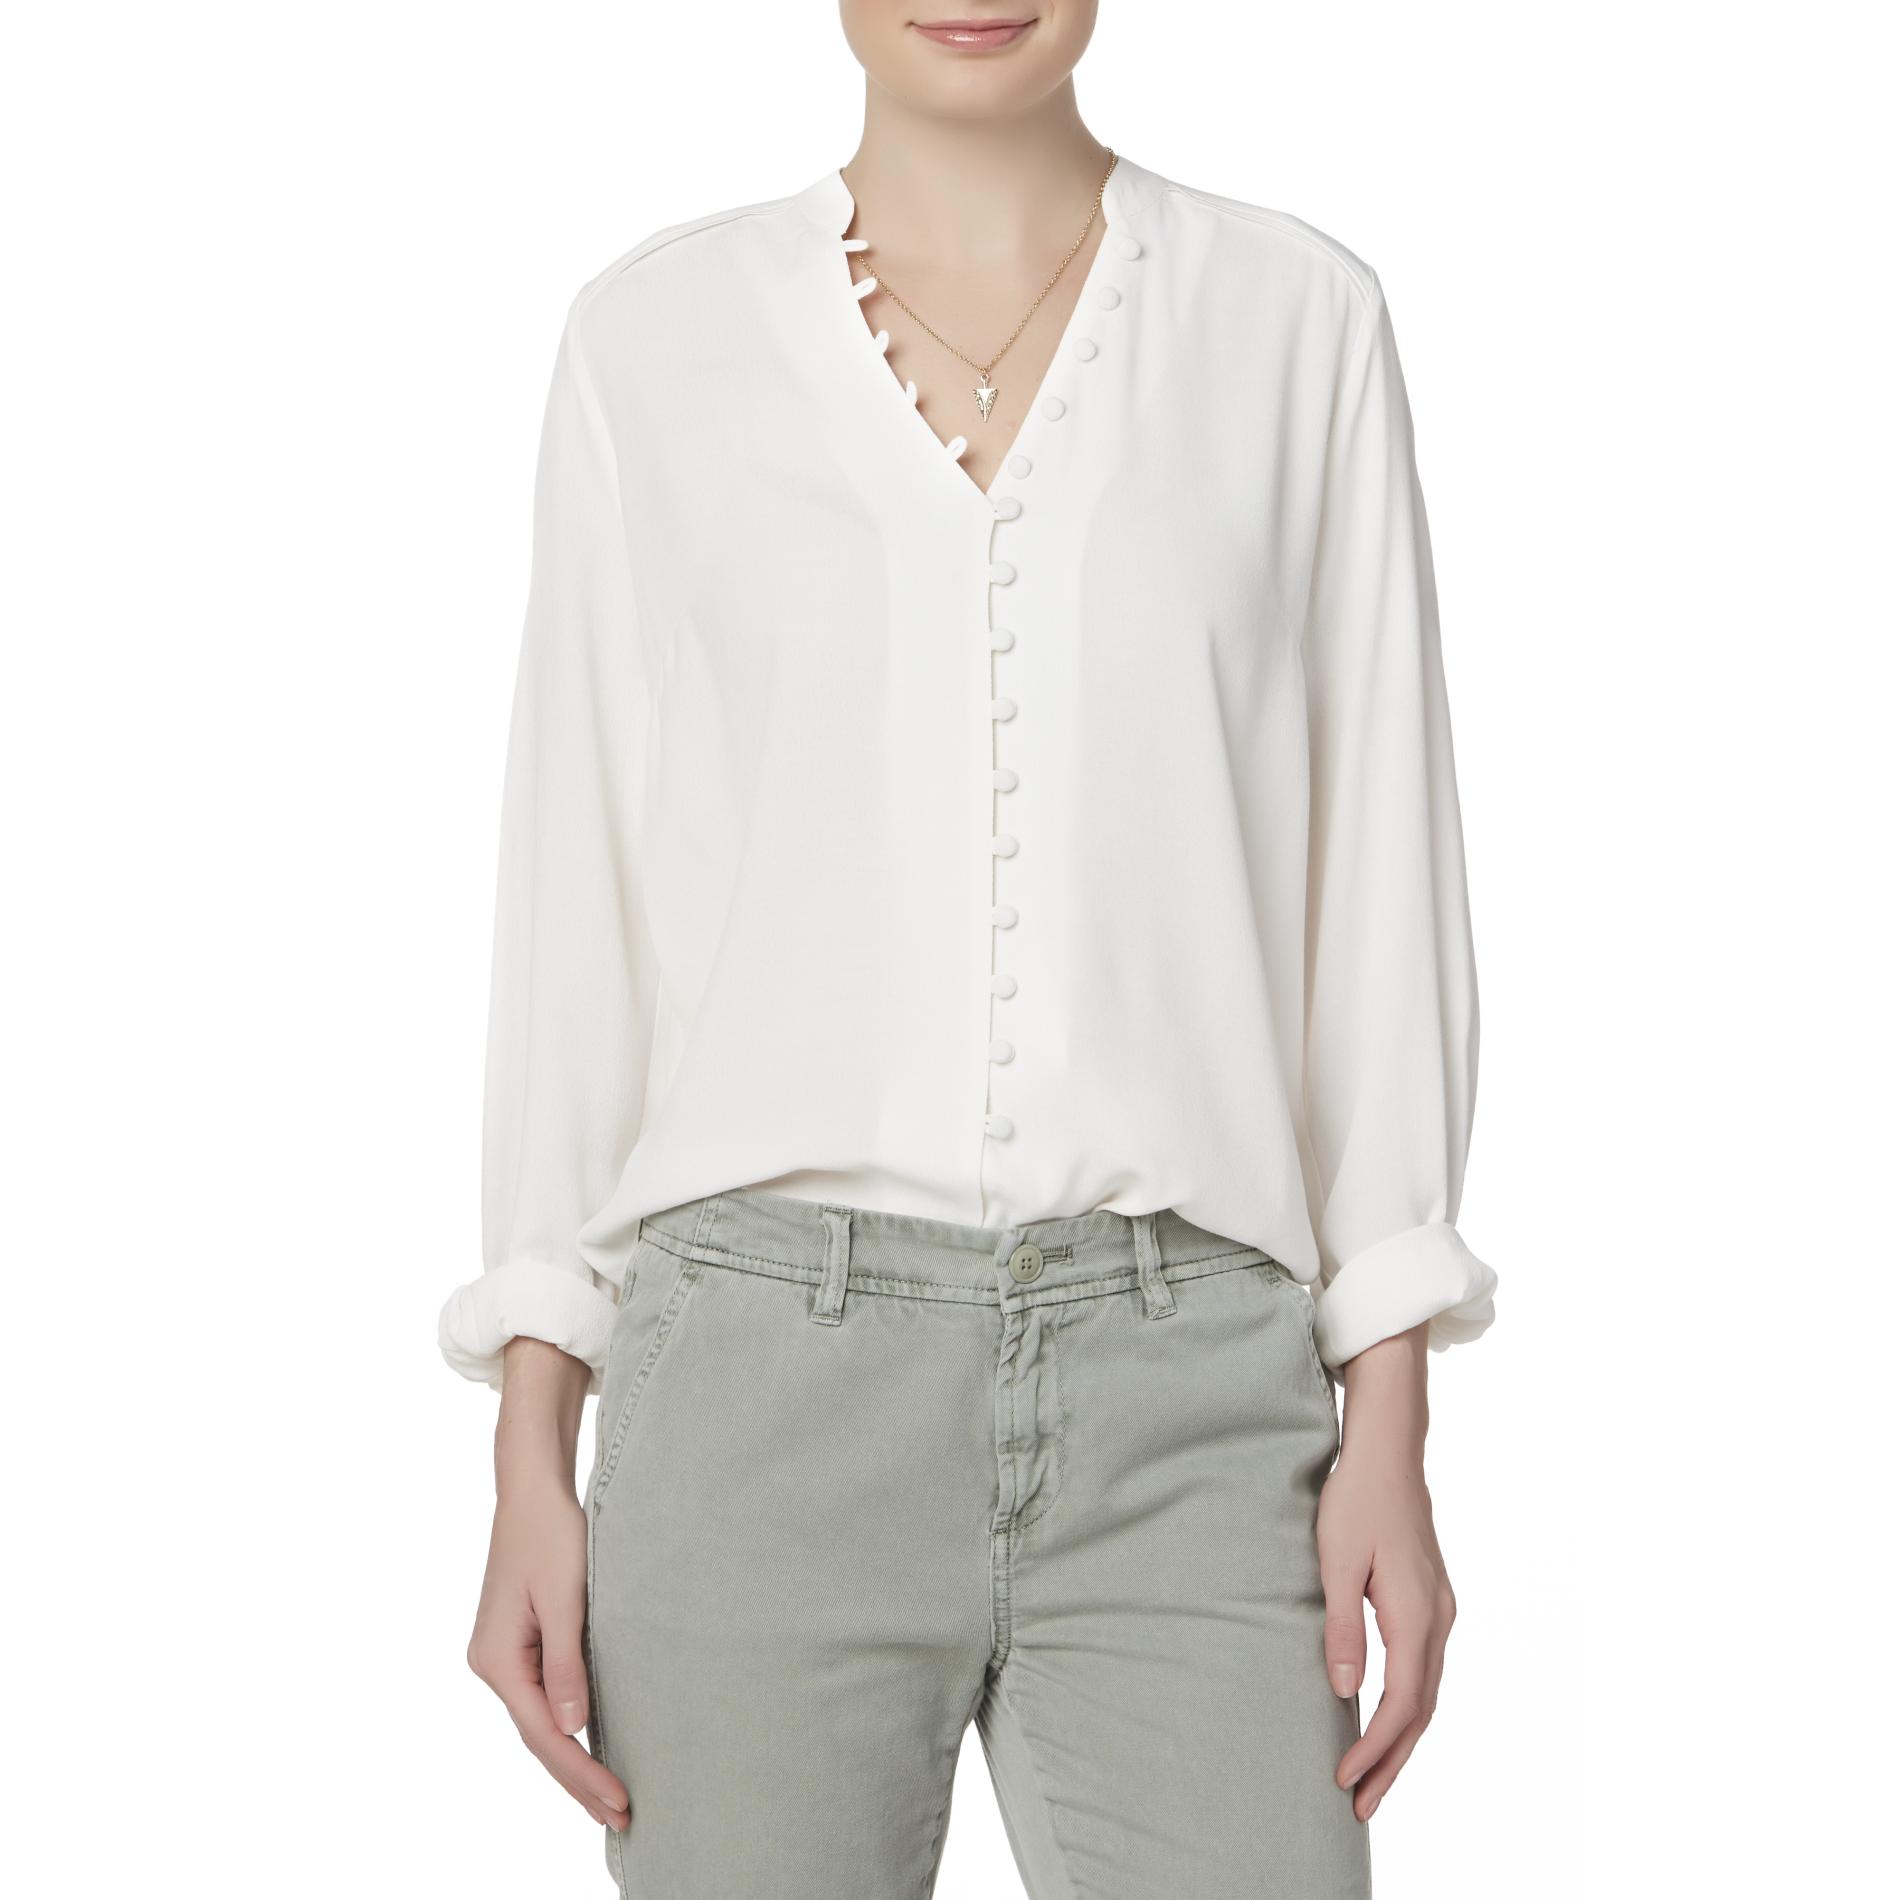 Simply Styled Women's Button-Front Blouse